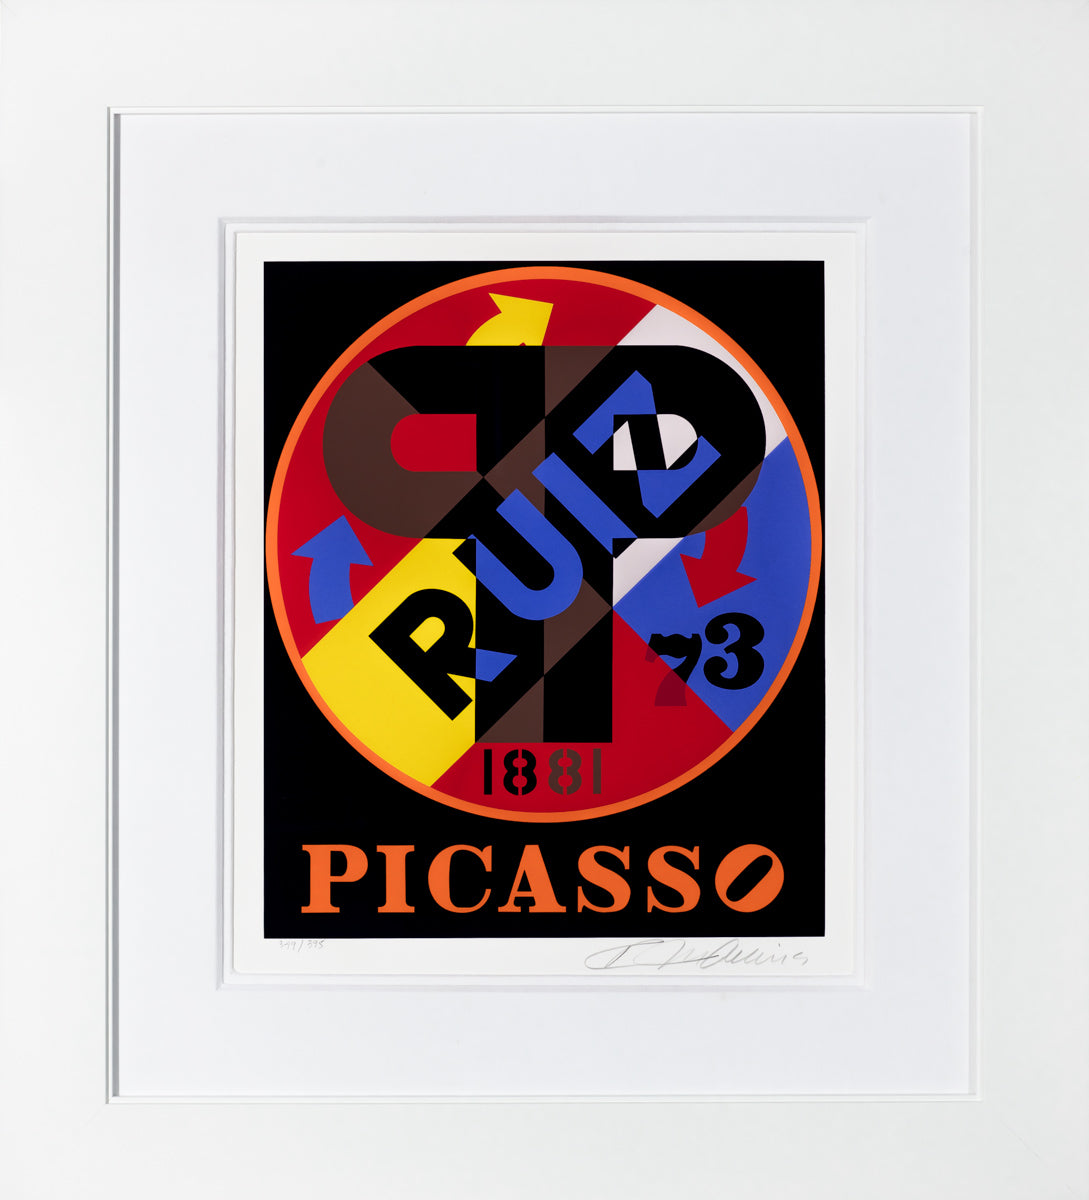 Picasso 1881 1873, 1997 by Robert Indiana